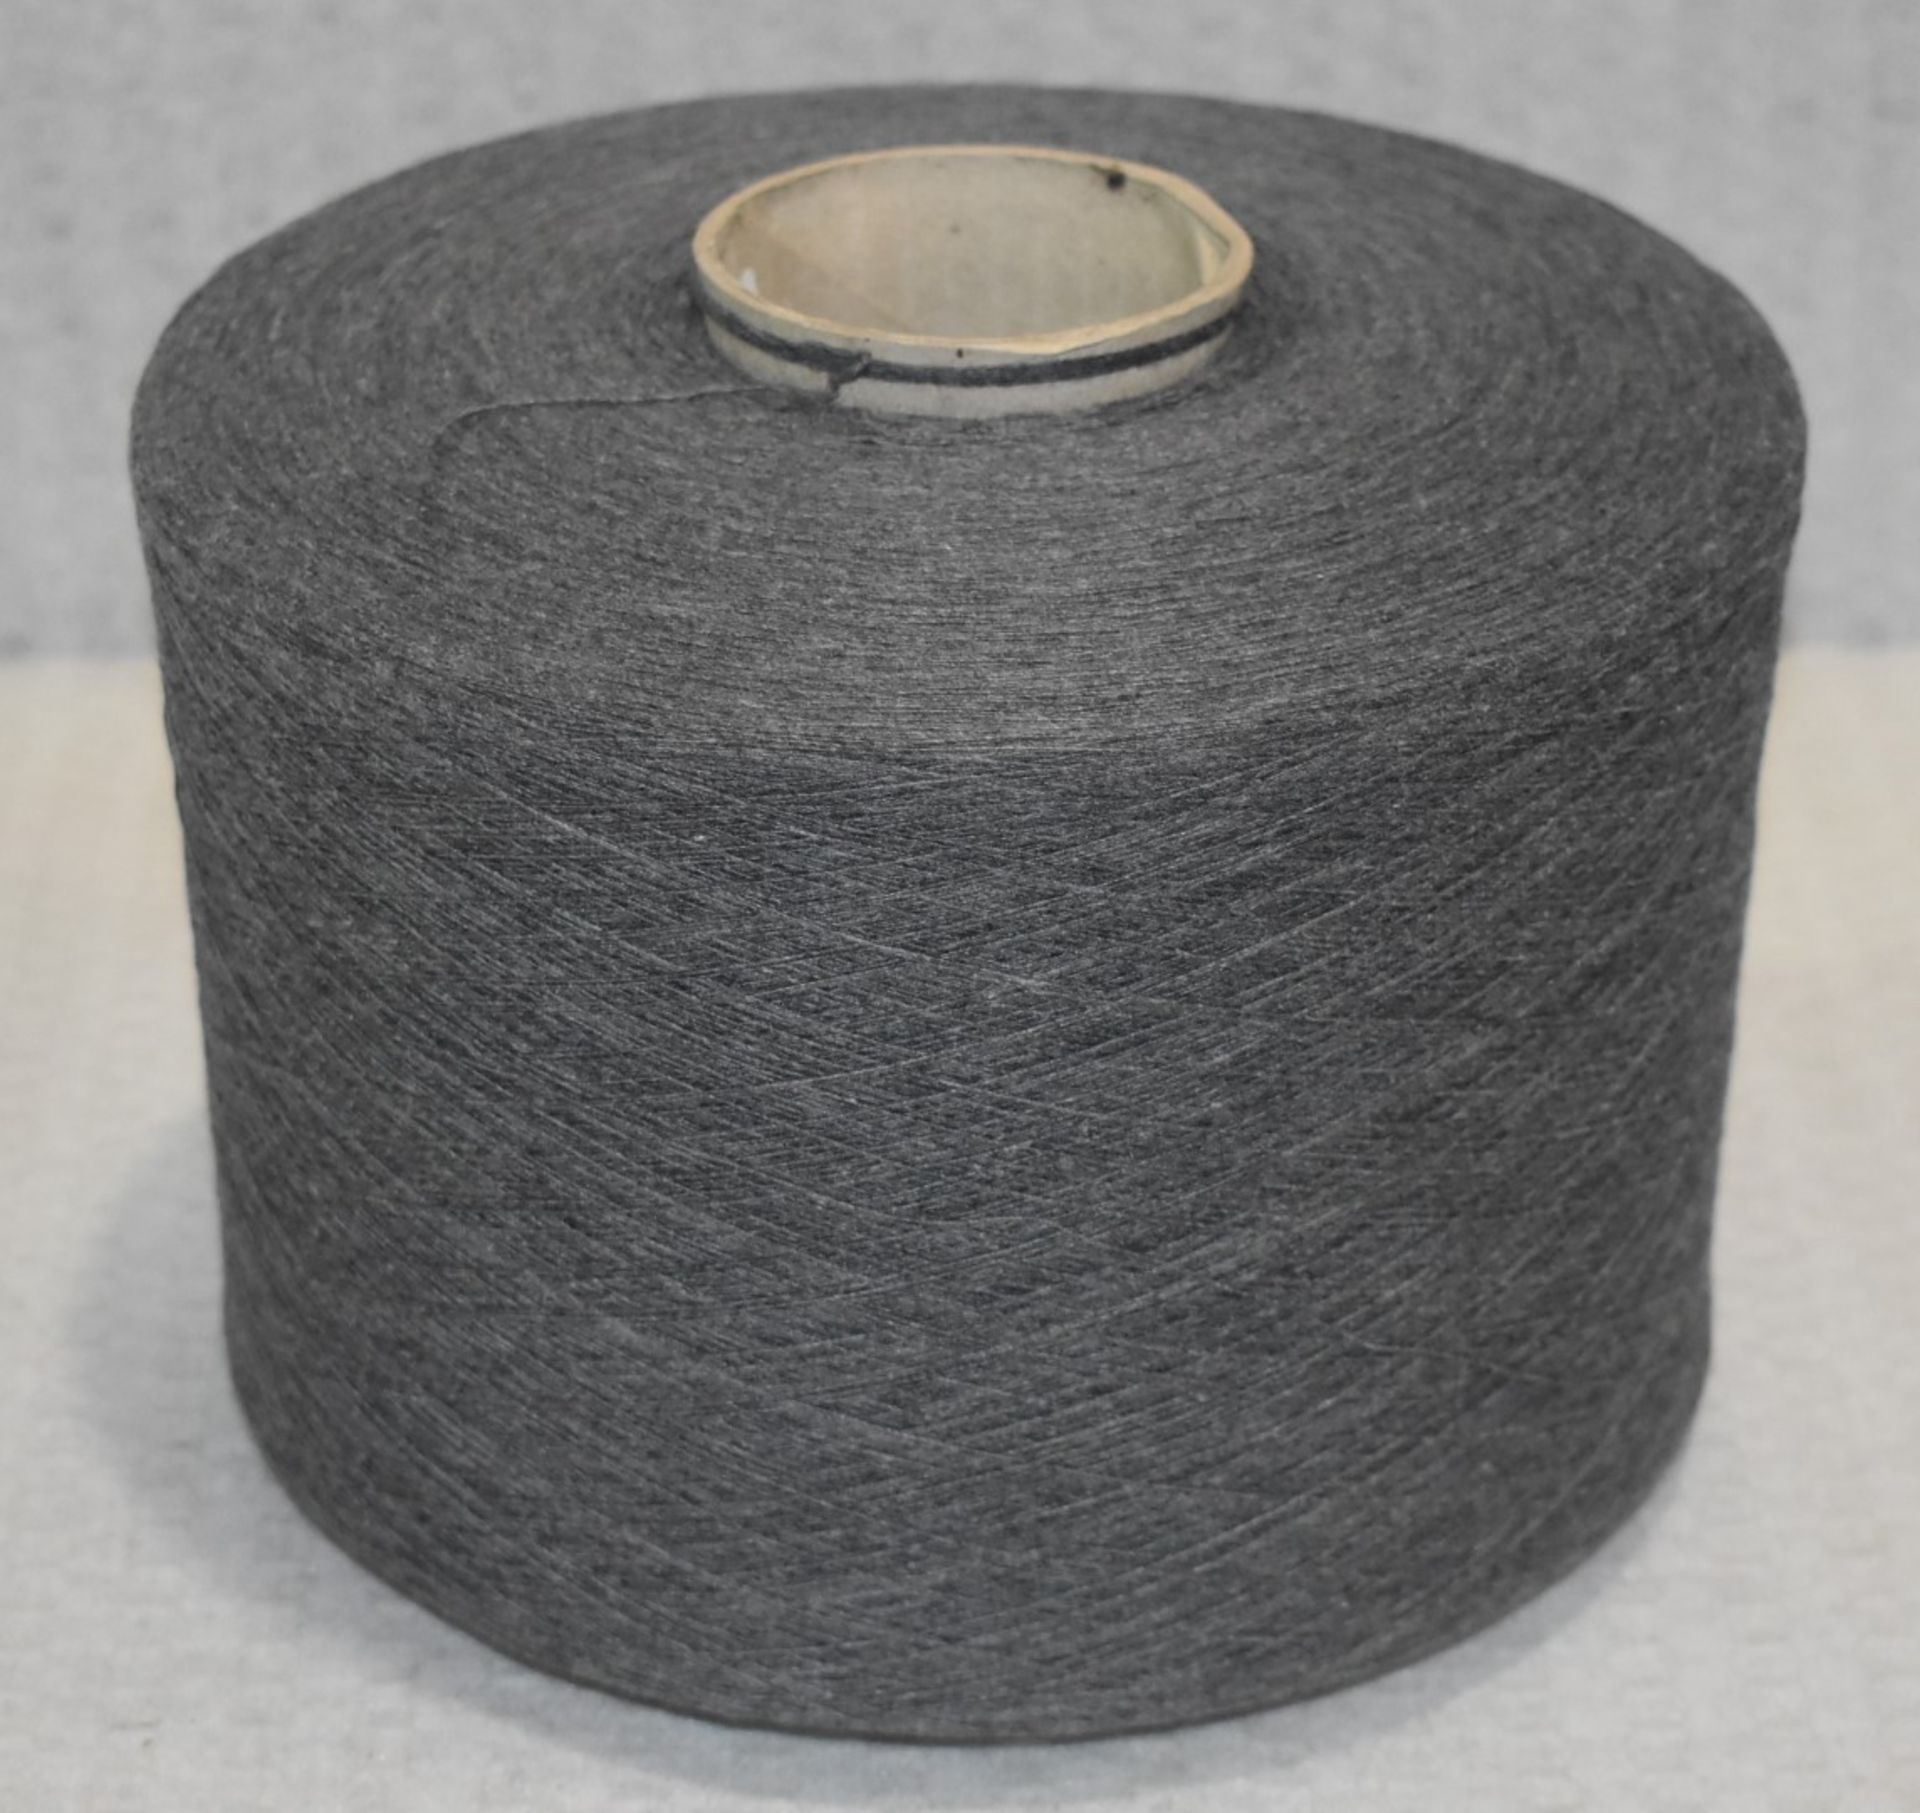 18 x Cones of 1/13 MicroCotton Knitting Yarn - Mid Grey - Approx Weight: 2,500g - New Stock ABL Yarn - Image 13 of 16